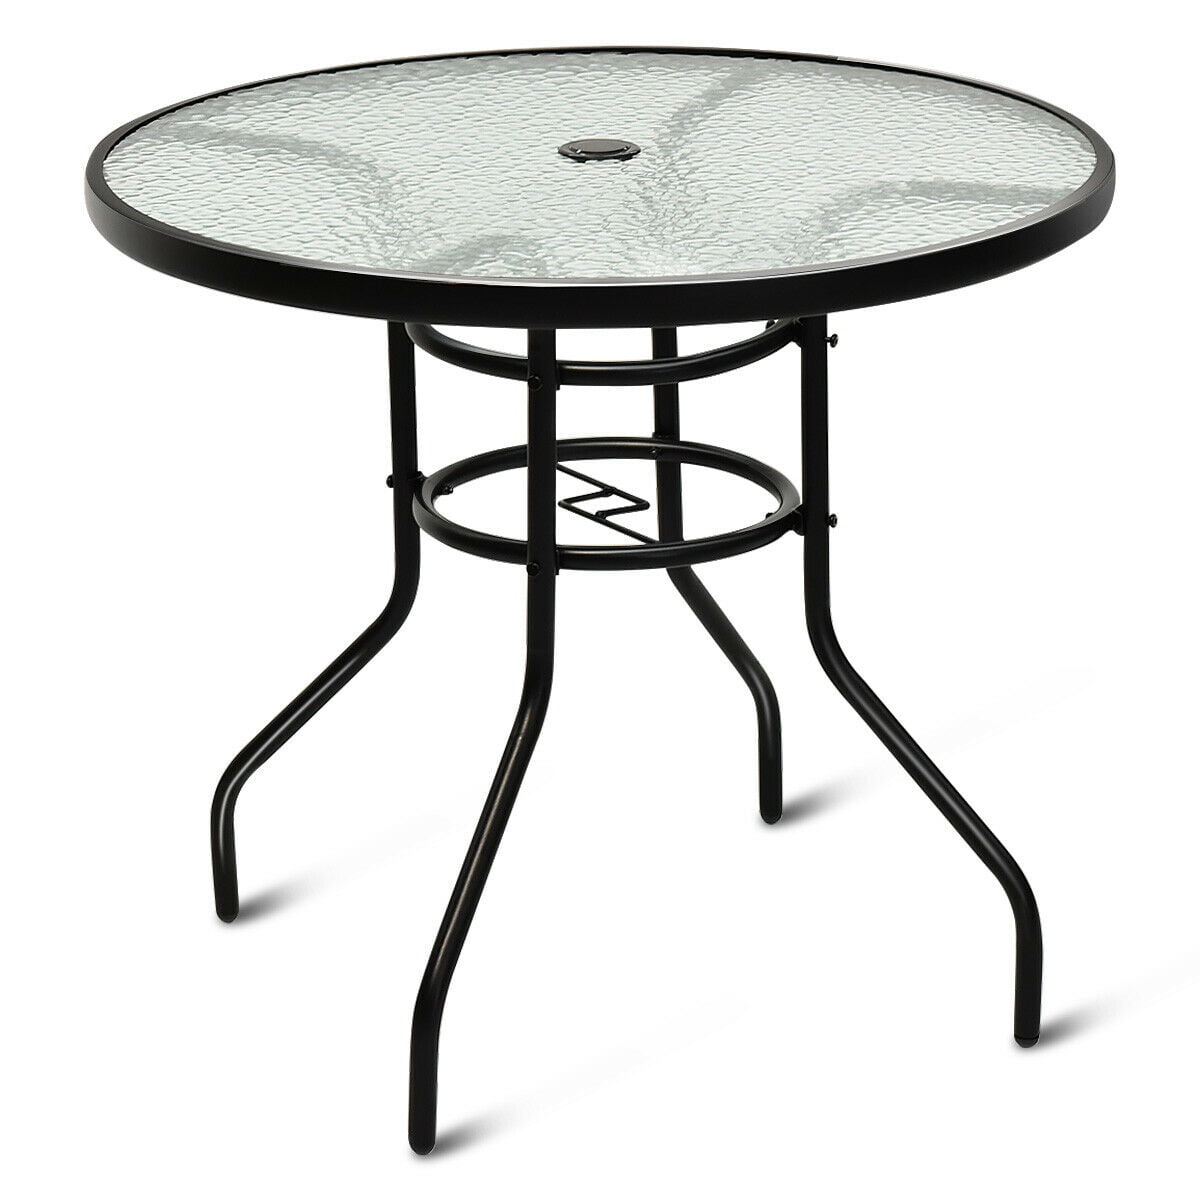 LHONE 31.5 Patio Round Table Steel Frame Dining Table Water Wave Glass Top 